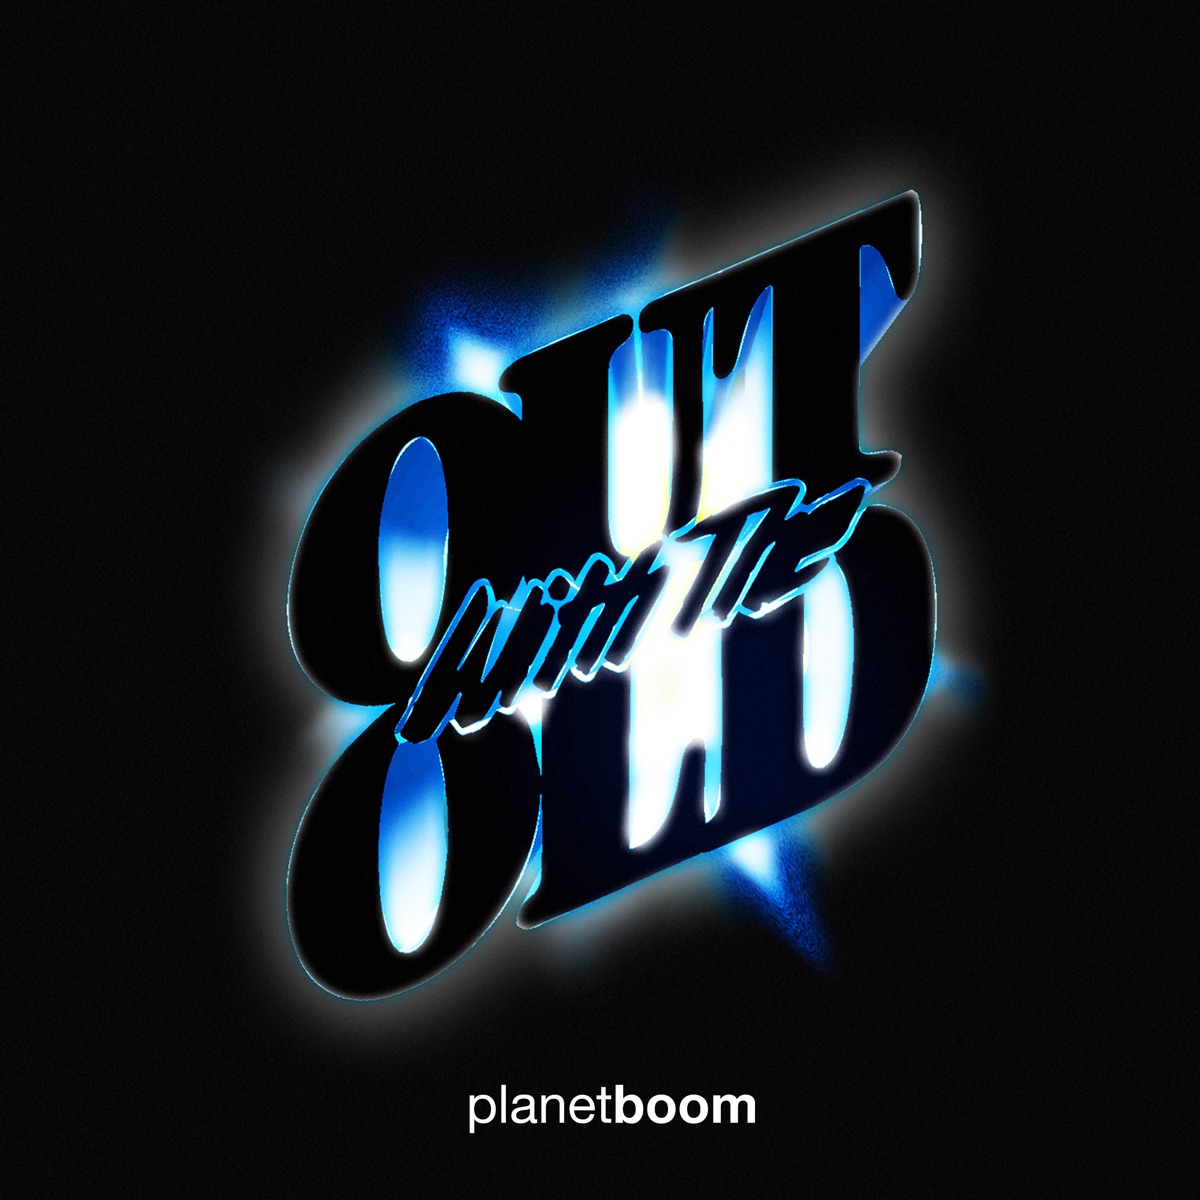 Greatest in the World (Demo) - Song by planetboom - Apple Music